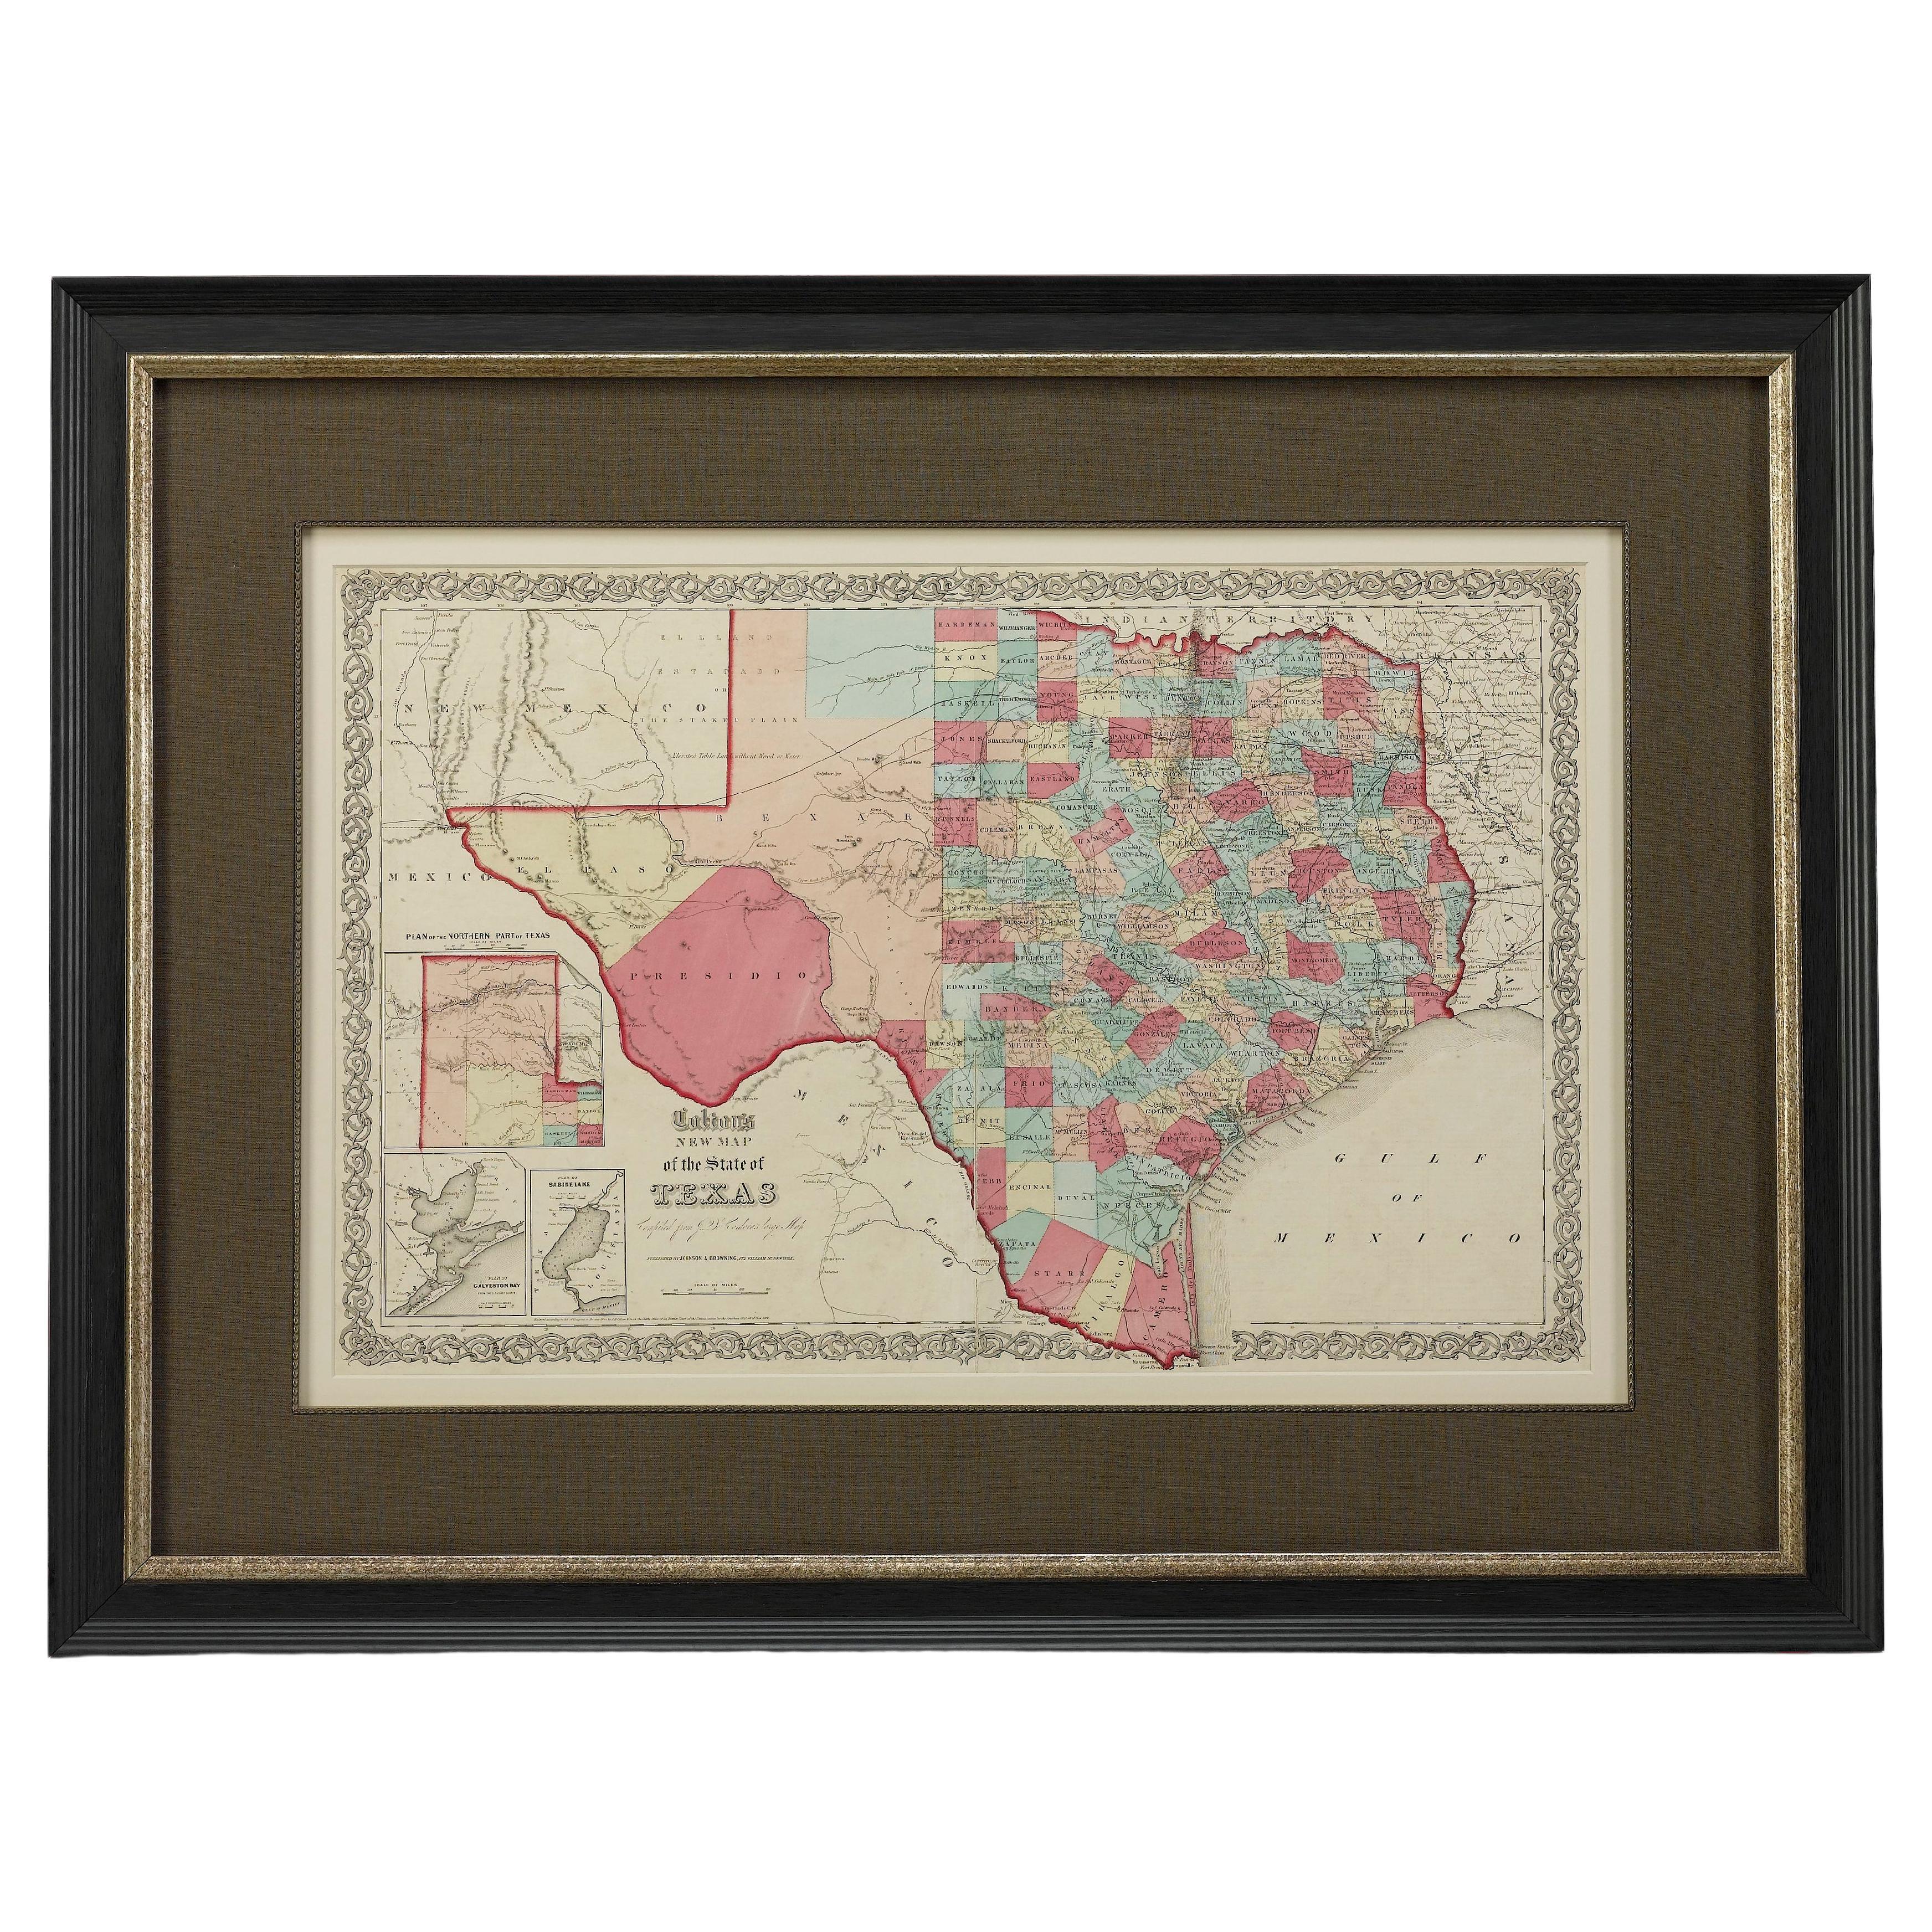 "Colton's New Map of the State of Texas..." de 1859 par Johnson & Browning